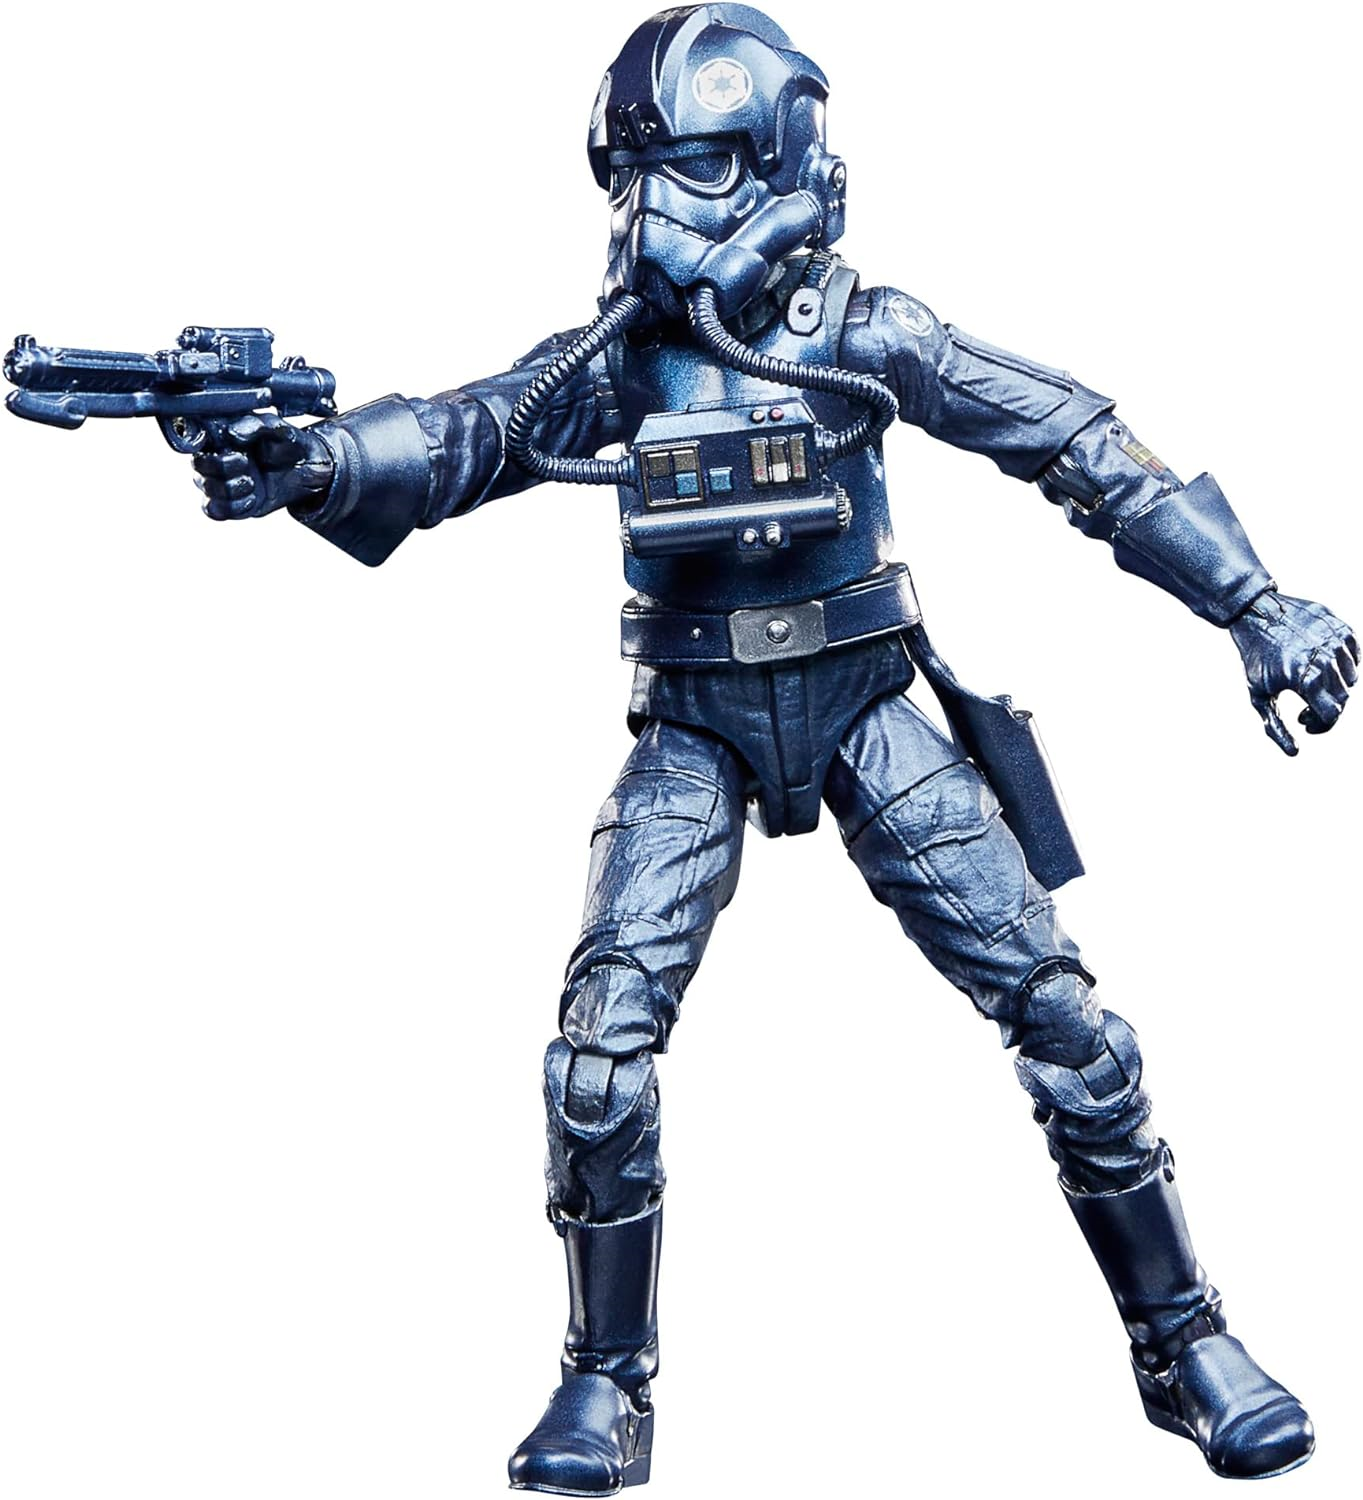 Star Wars The Black Series Carbonized Edition  - Emperor Guard & TIE Pilot - 2-Pack  15cm Pack F70115S0 5010996108500